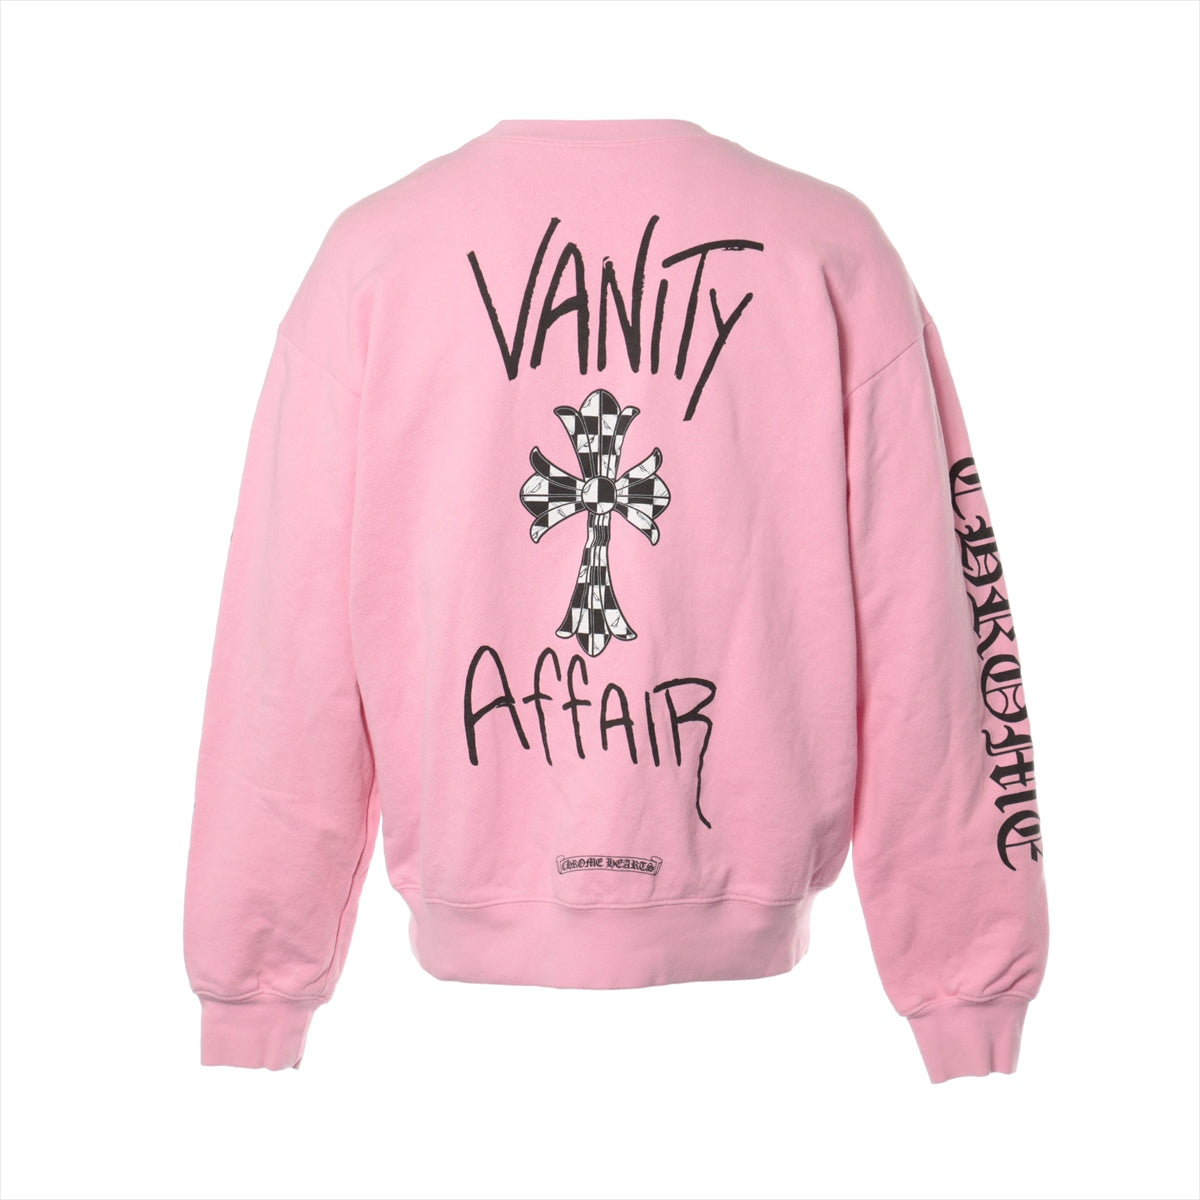 Chrome Hearts Matty Boy Basic knitted fabric Cotton size L Pink PPO VANITY AFFAIR